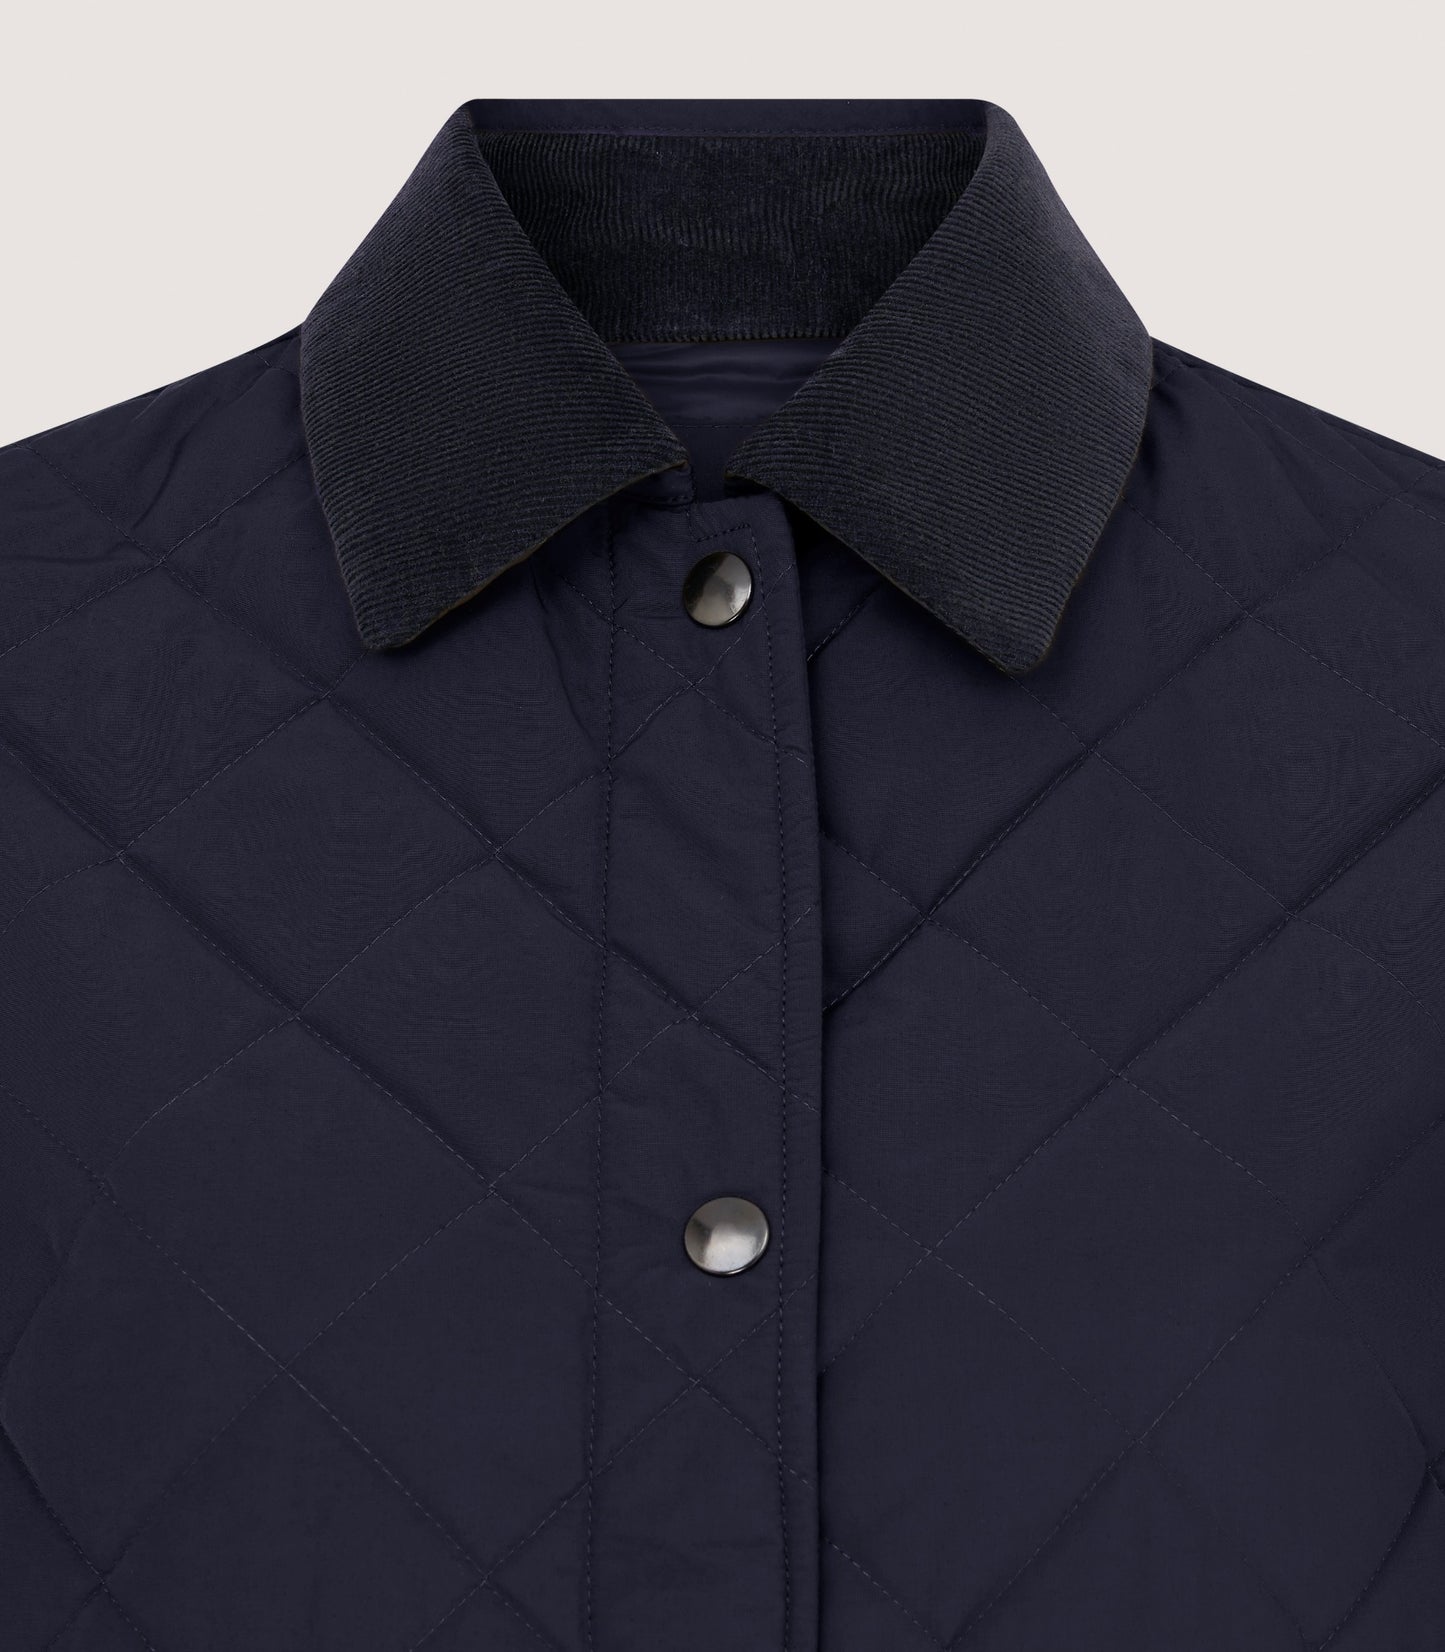 Women's Long Quilted Purdey Jacket in Navy